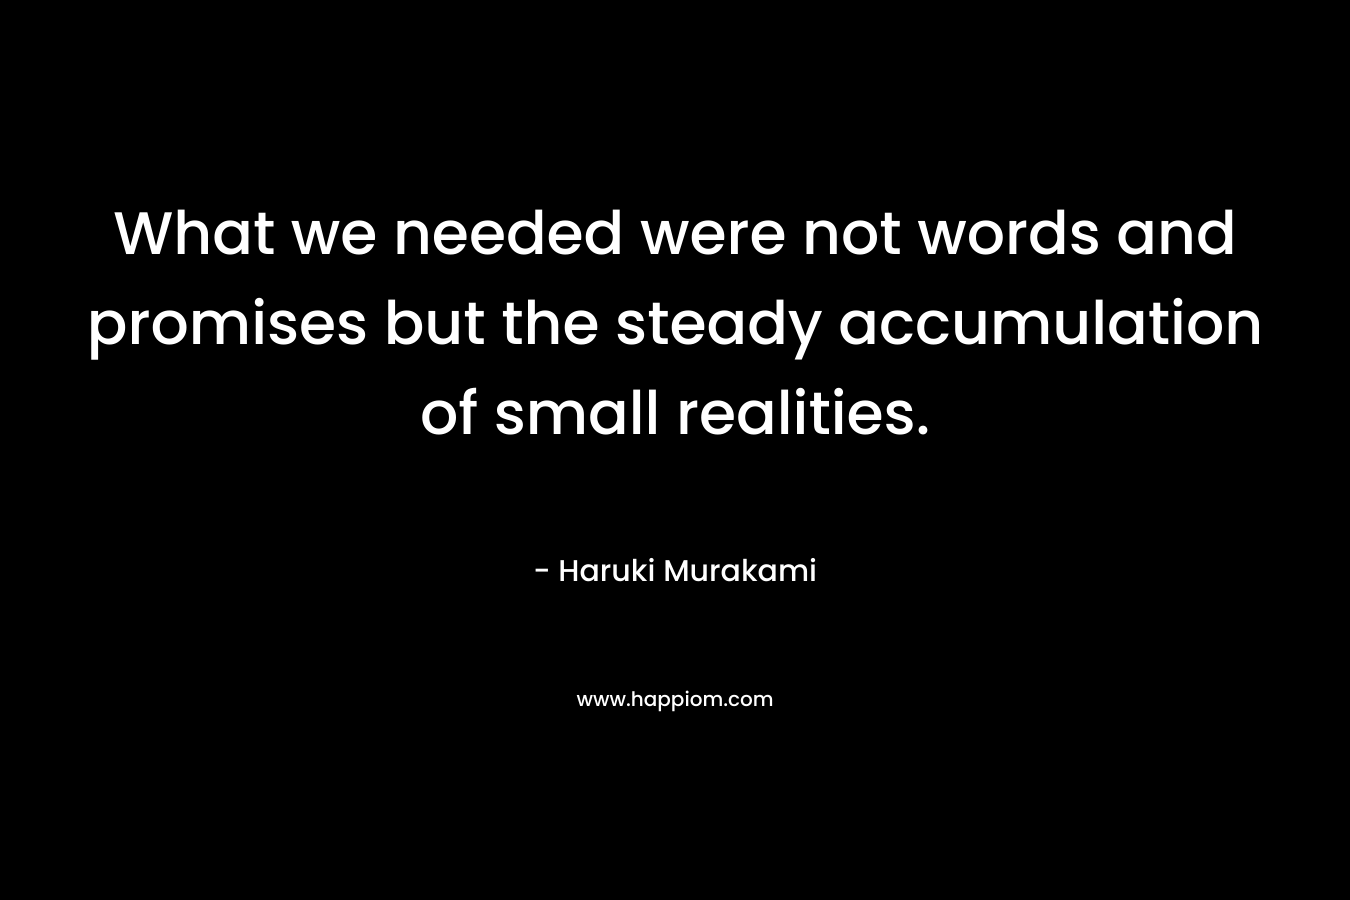 What we needed were not words and promises but the steady accumulation of small realities.